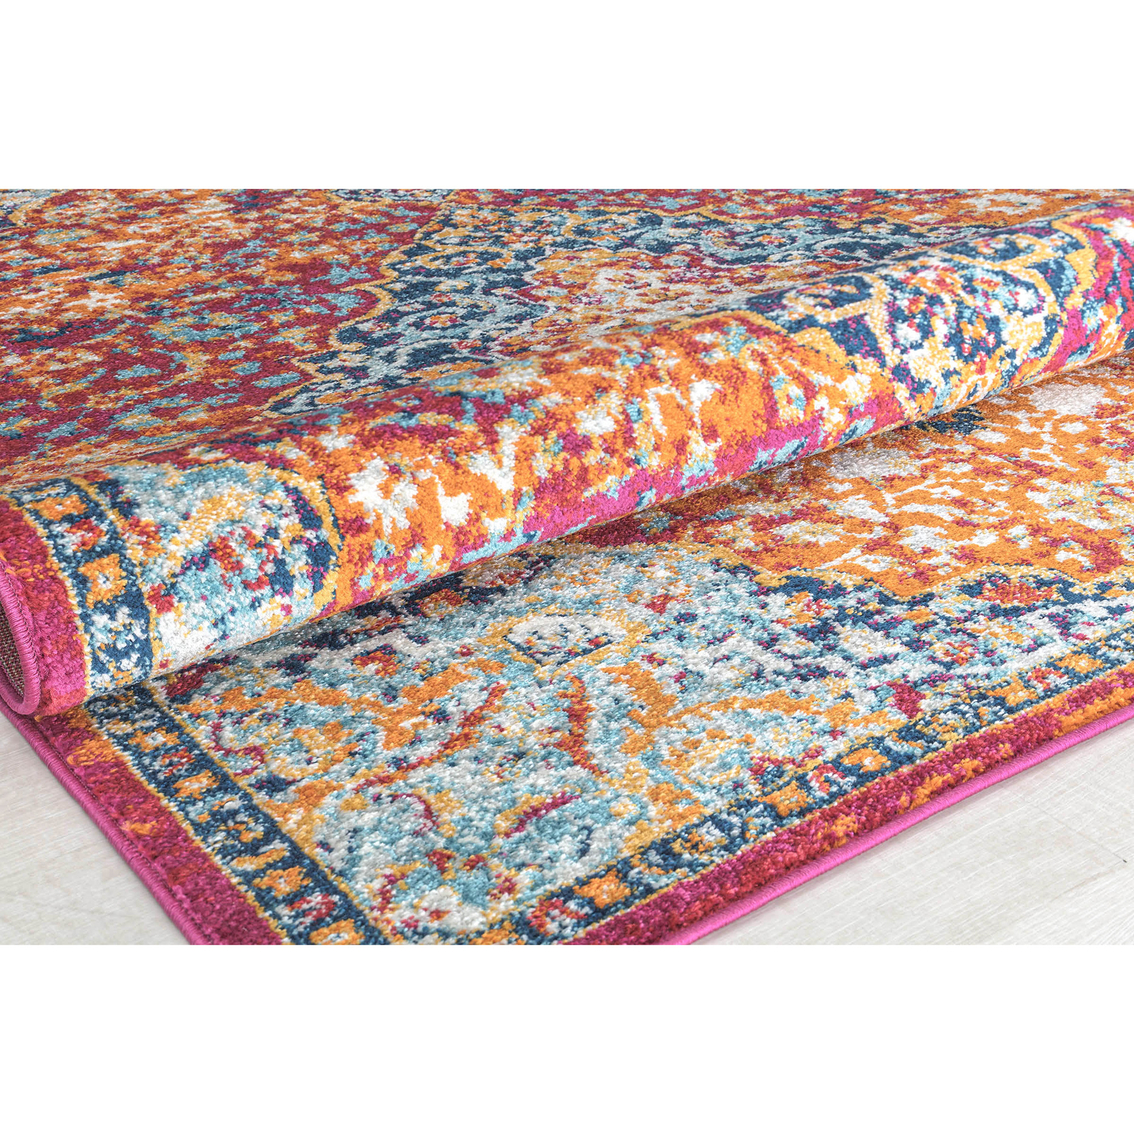 Rugs America Harper Rosy Peach Abstract Vintage Area Rug - Image 5 of 8